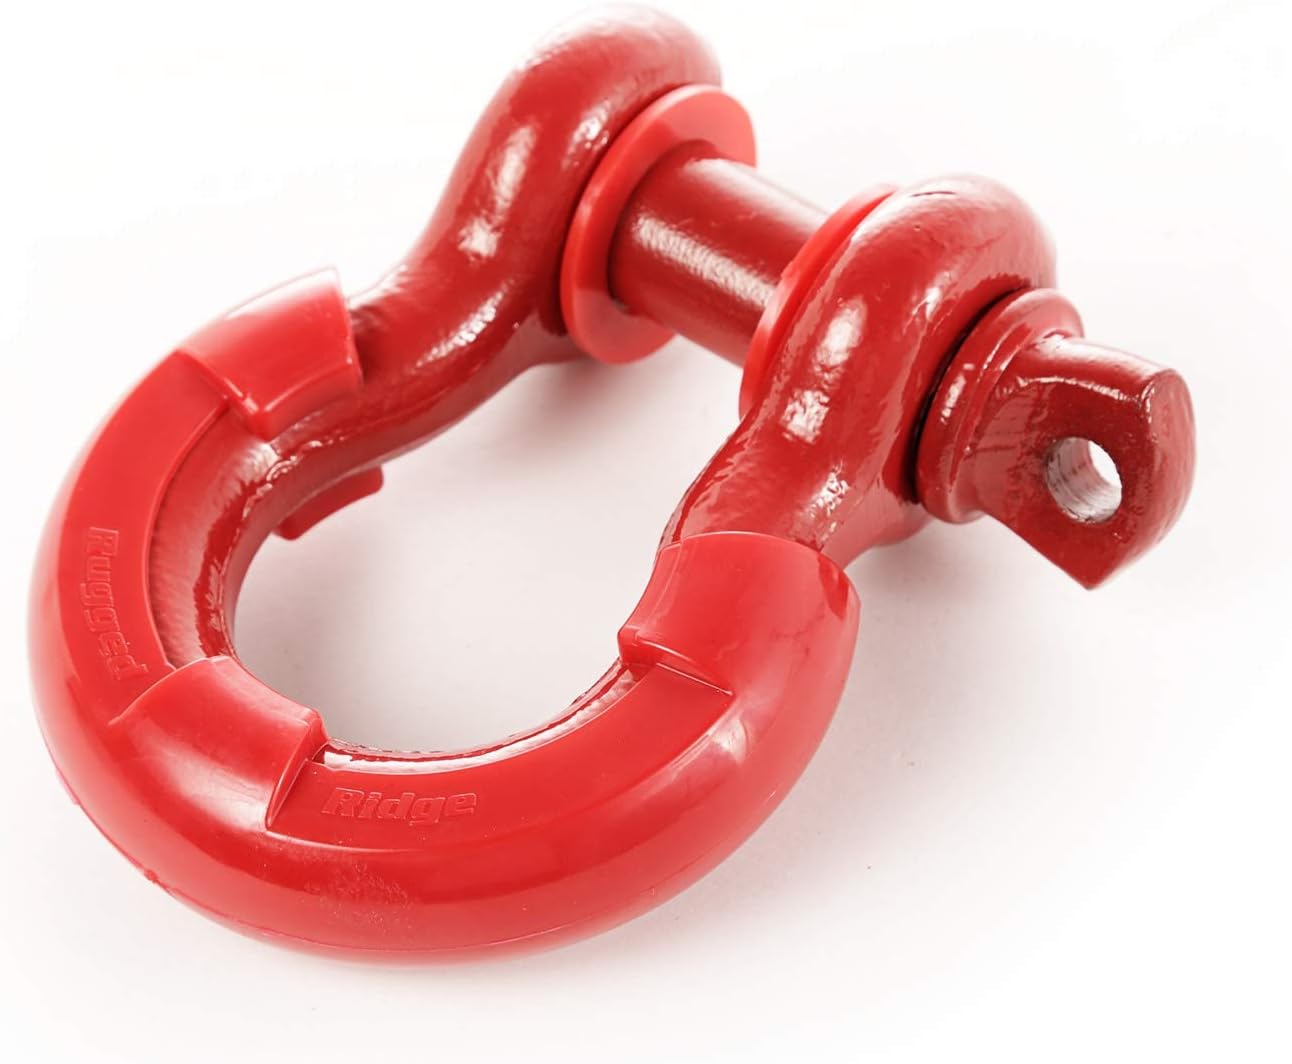 Rugged Ridge 11235.31 D-Ring Shackle Isolator Kit, Red Pair, 3/4 inch